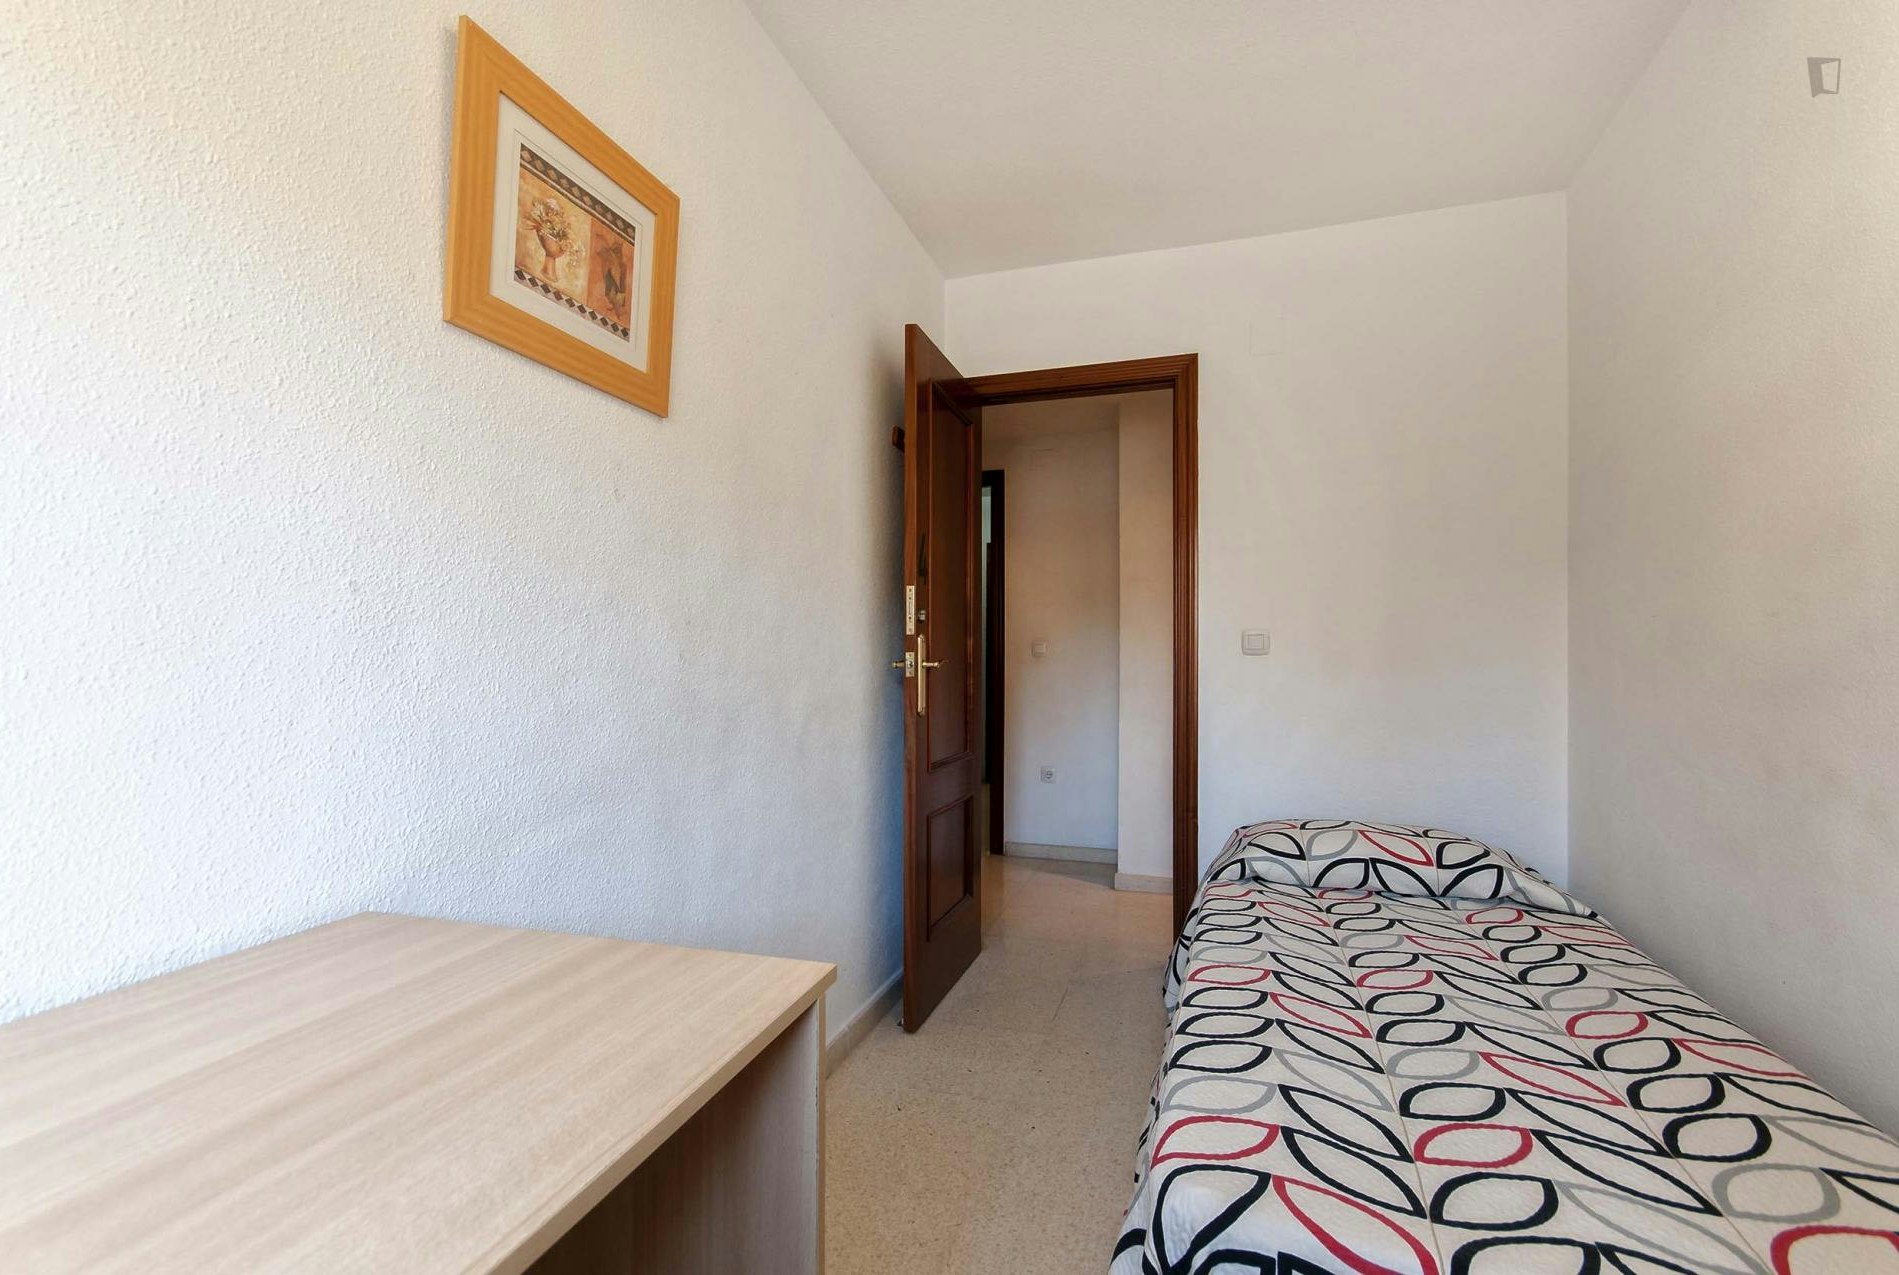 Single bedroom in a 6-bedroom apartment close to Marq - Castillo train station